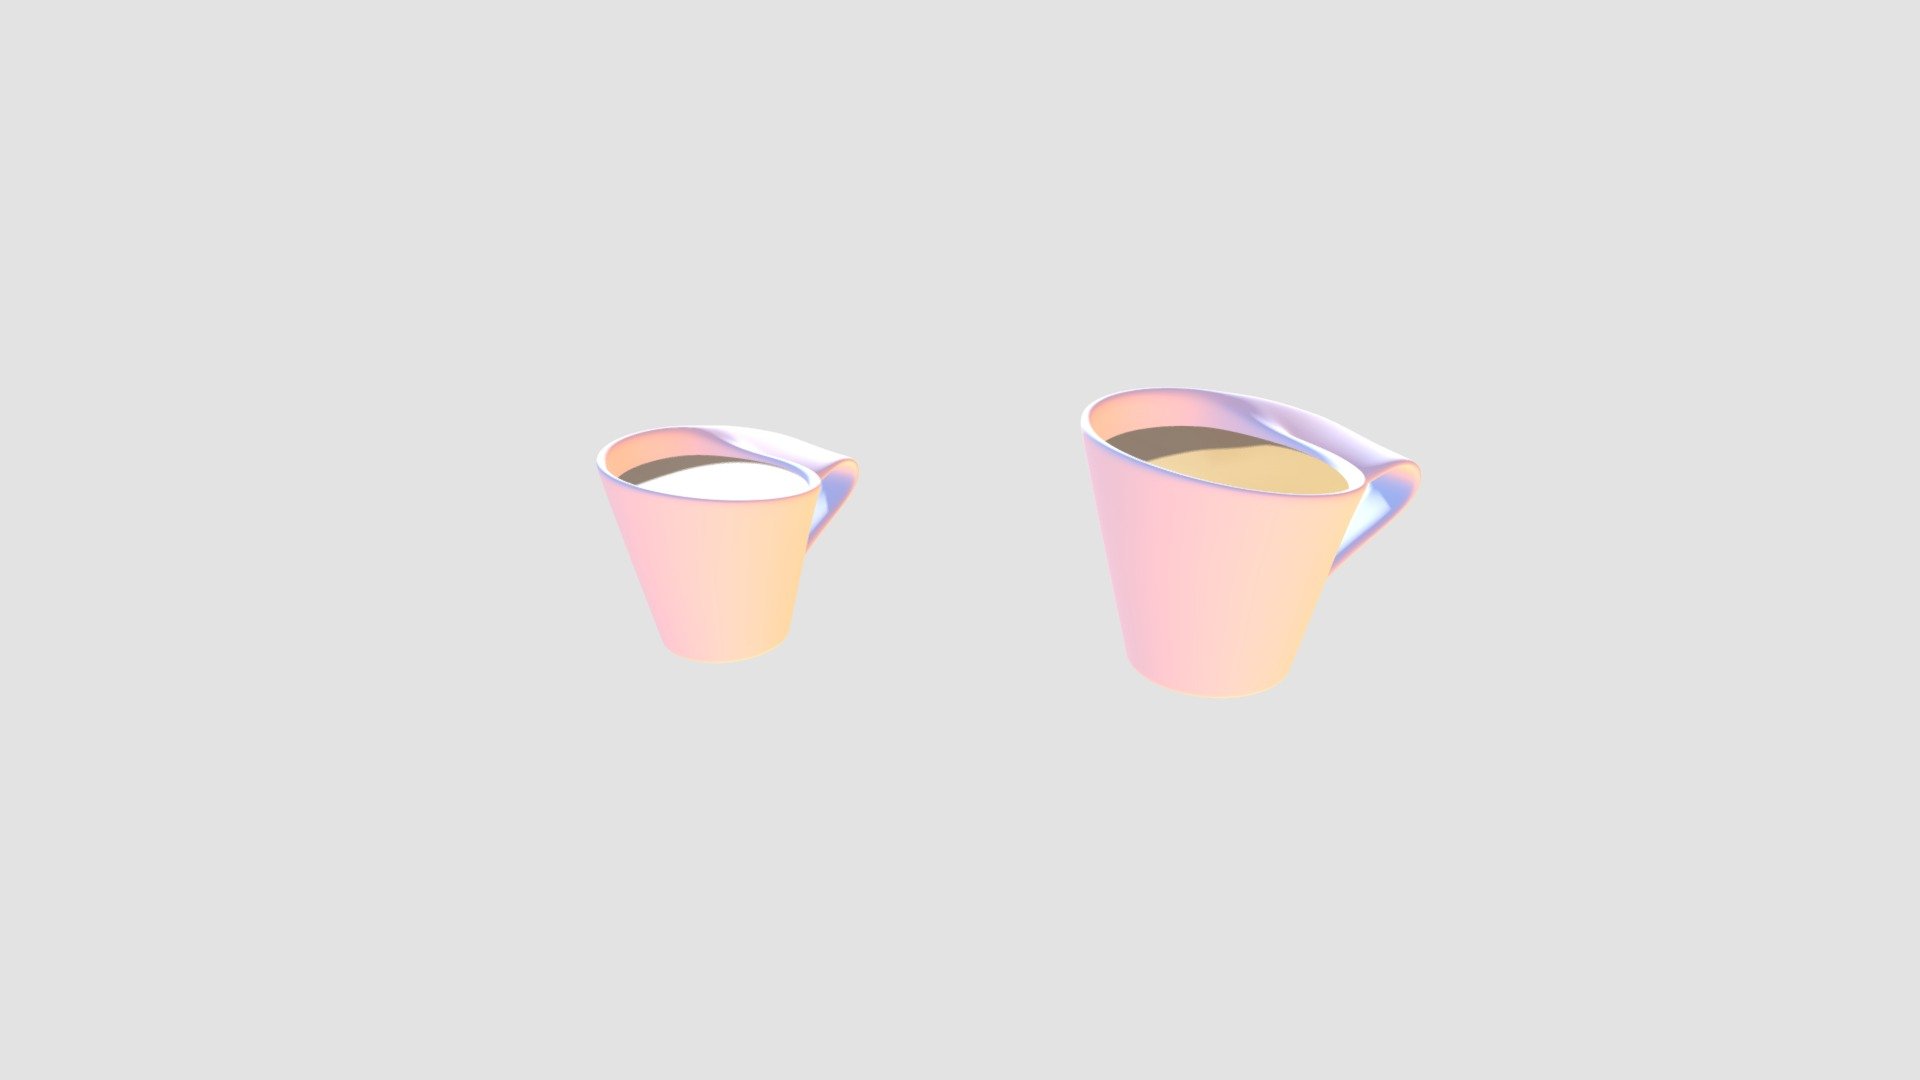 Highly detailed 3d model of tea cups with all textures, shaders and materials. It is ready to use, just put it into your scene 3d model